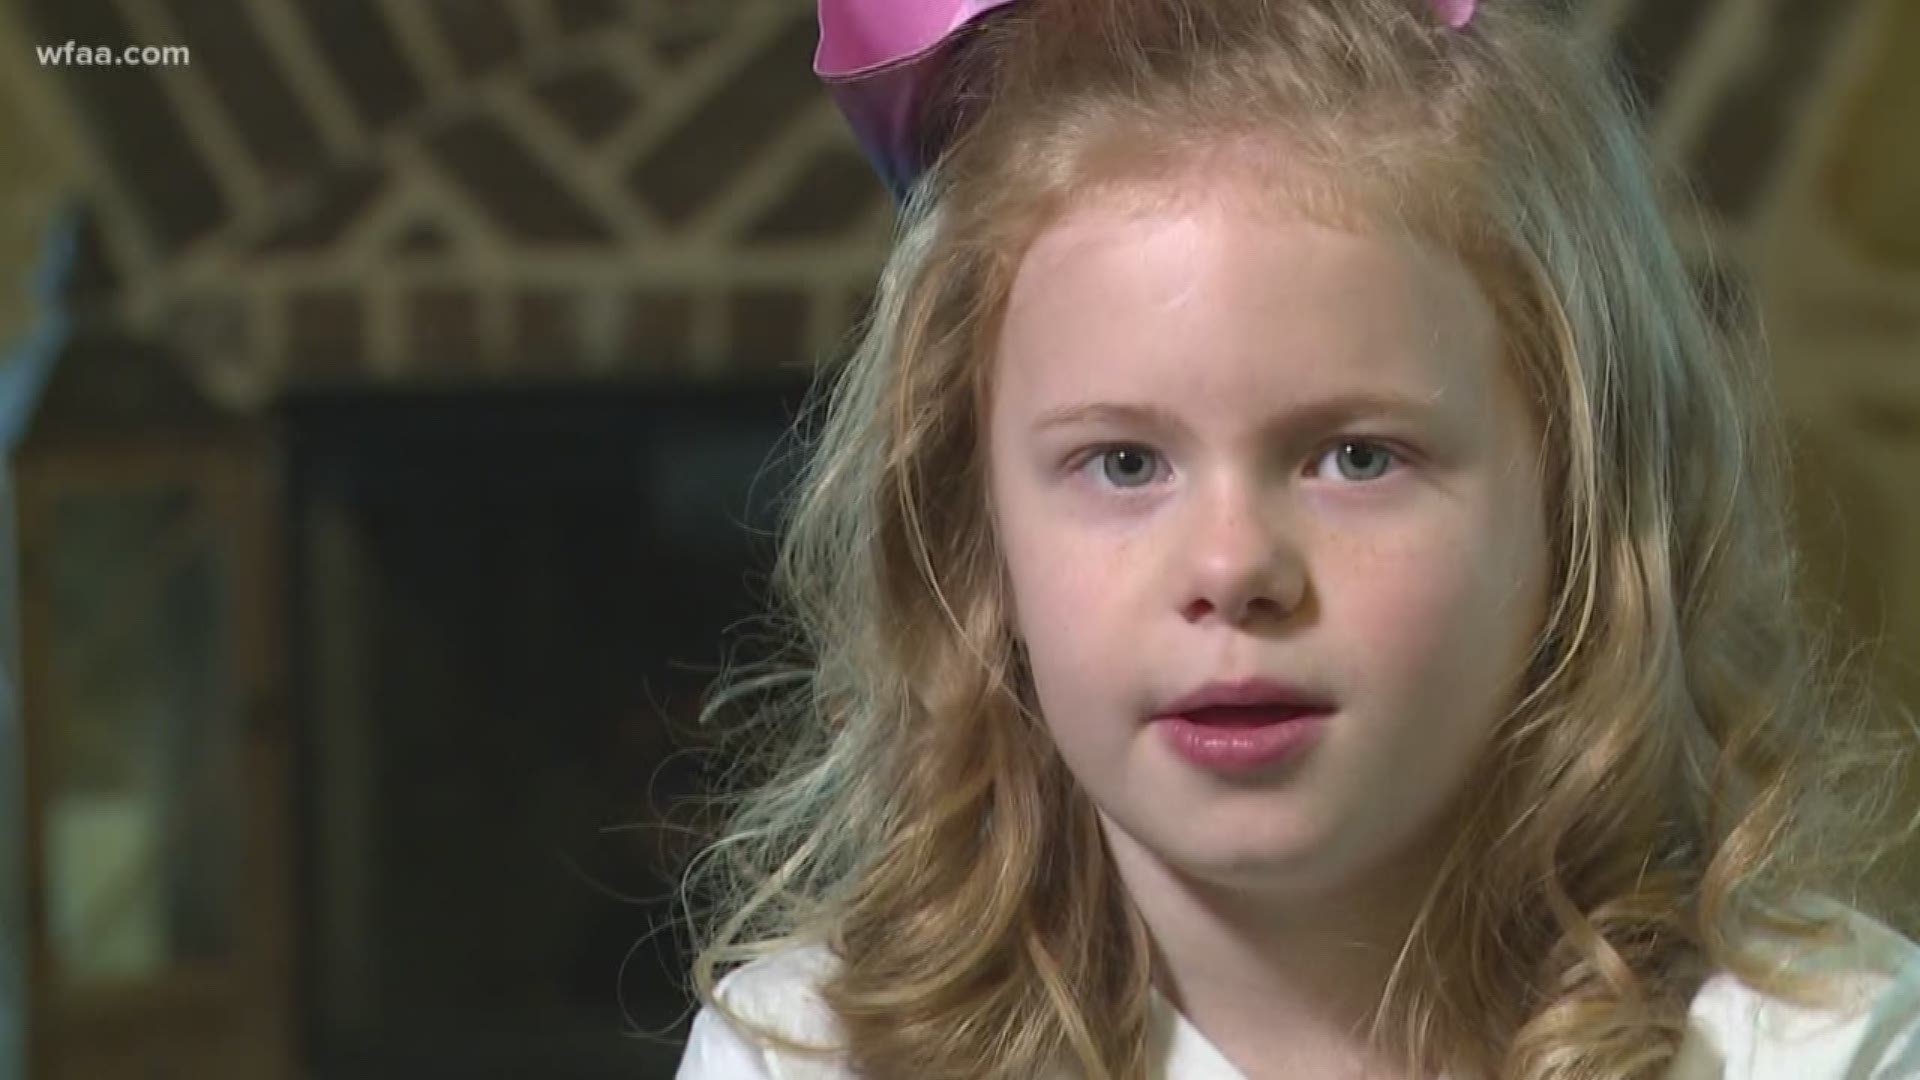 7-year-old founder of 'Abigail's Beads' helps those in need